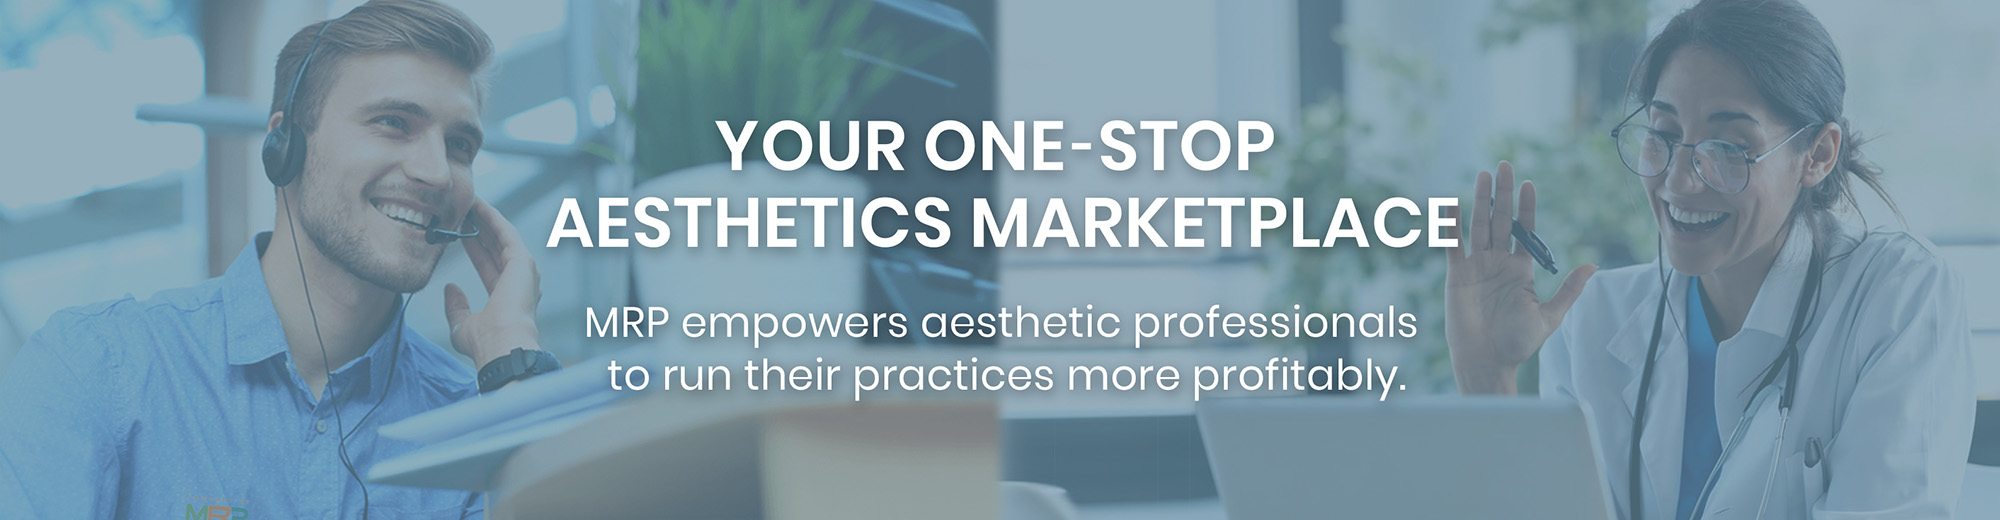 MRP your one stop aesthetics marketplace 